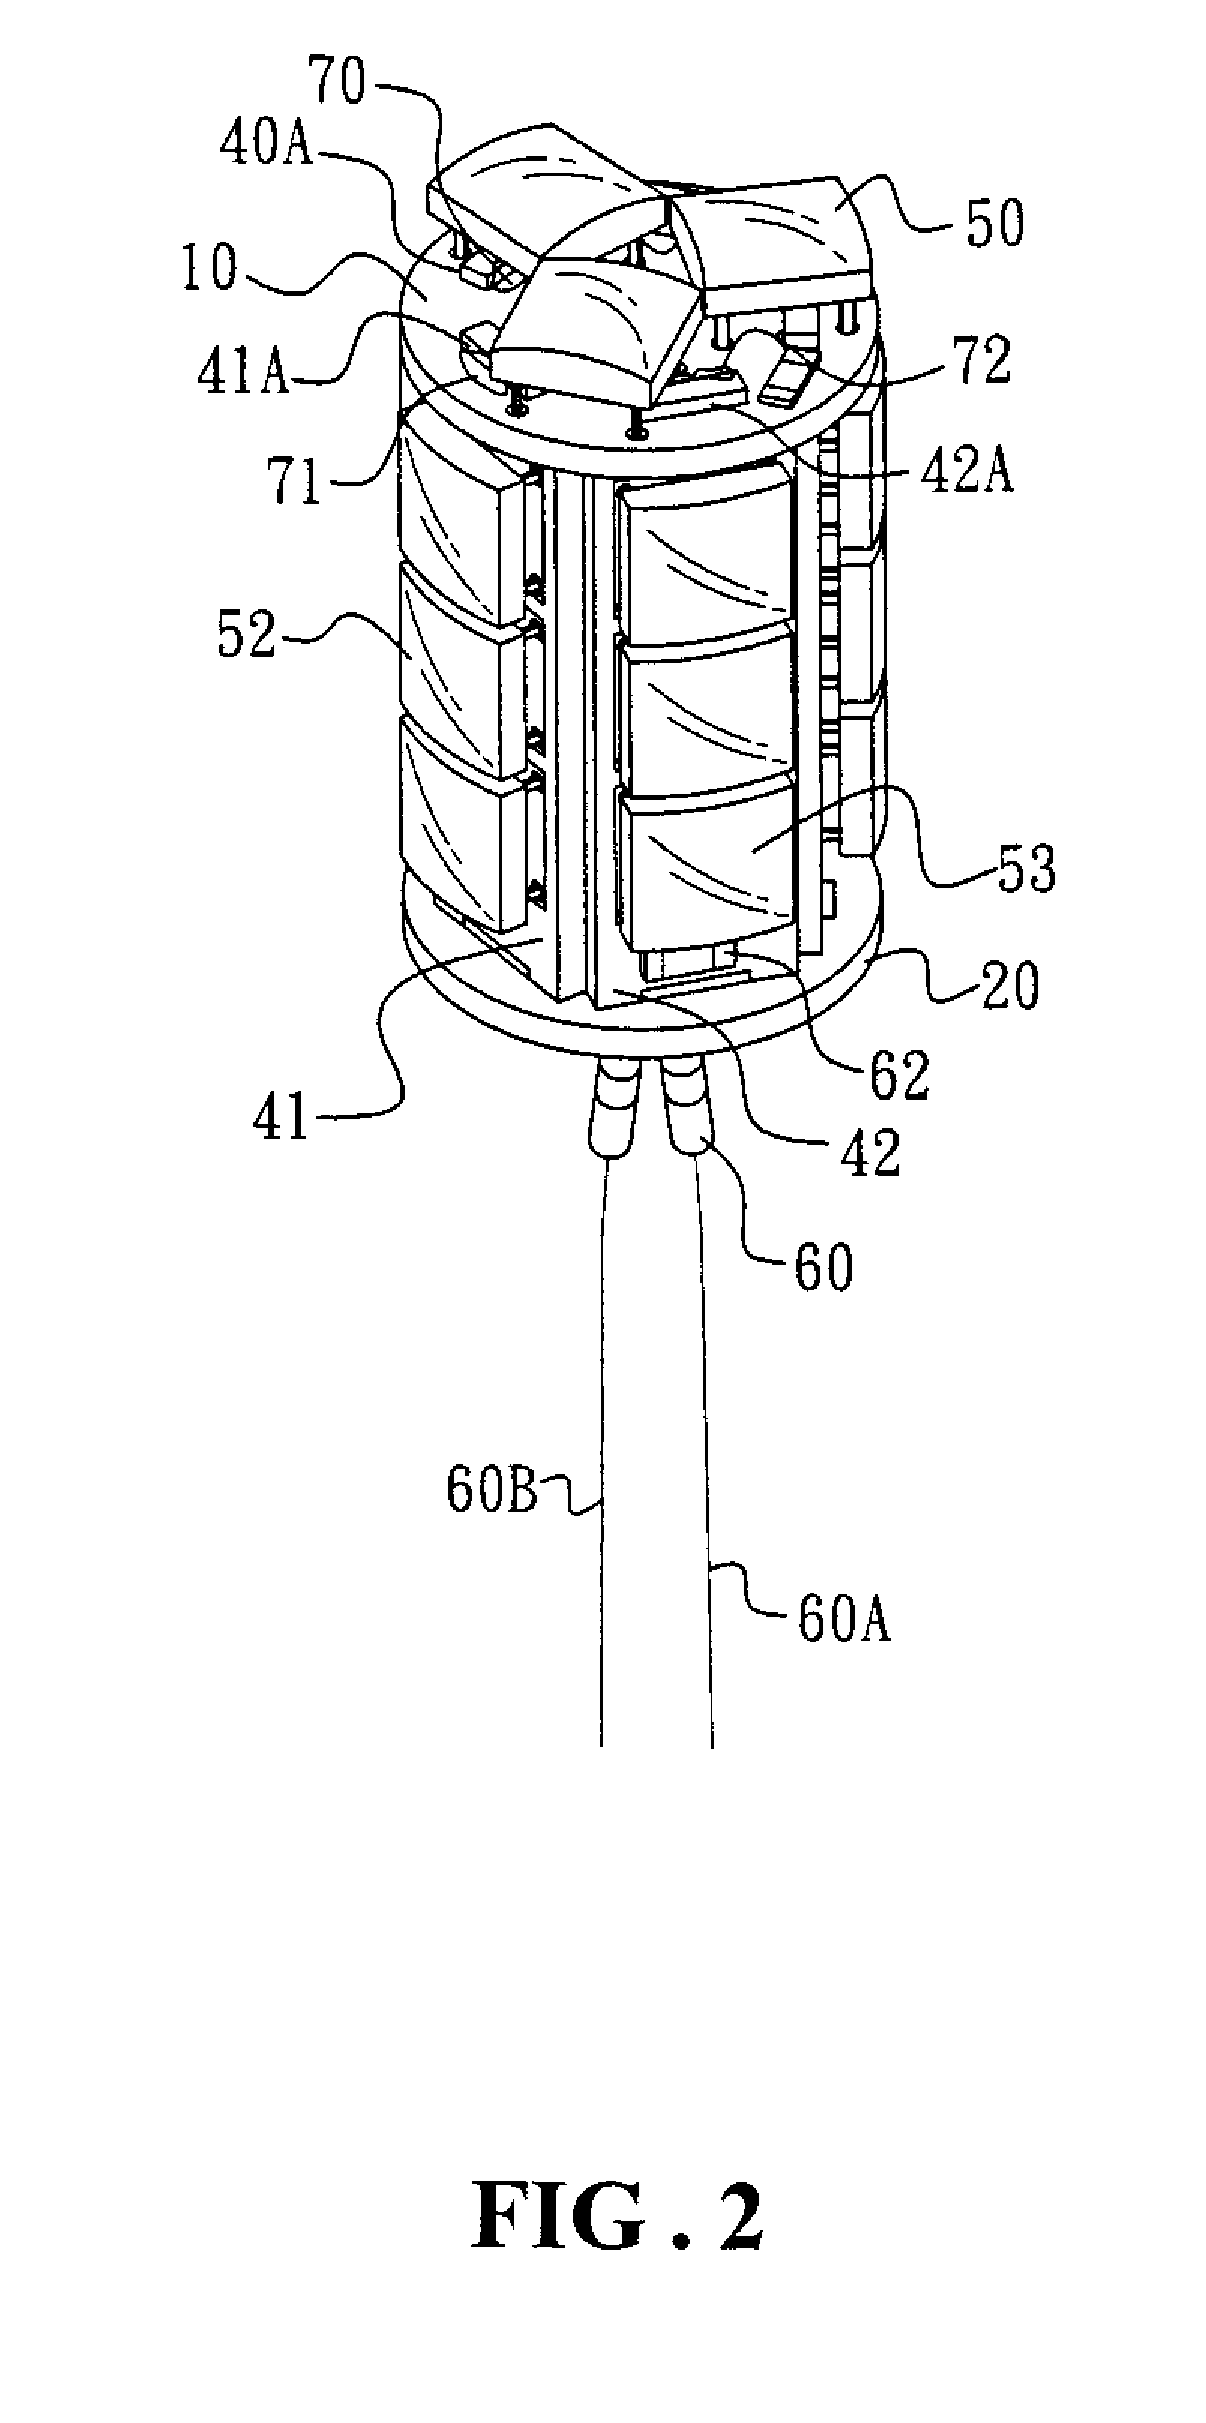 Light-emitting diode stacked lighting core for lamp bulb